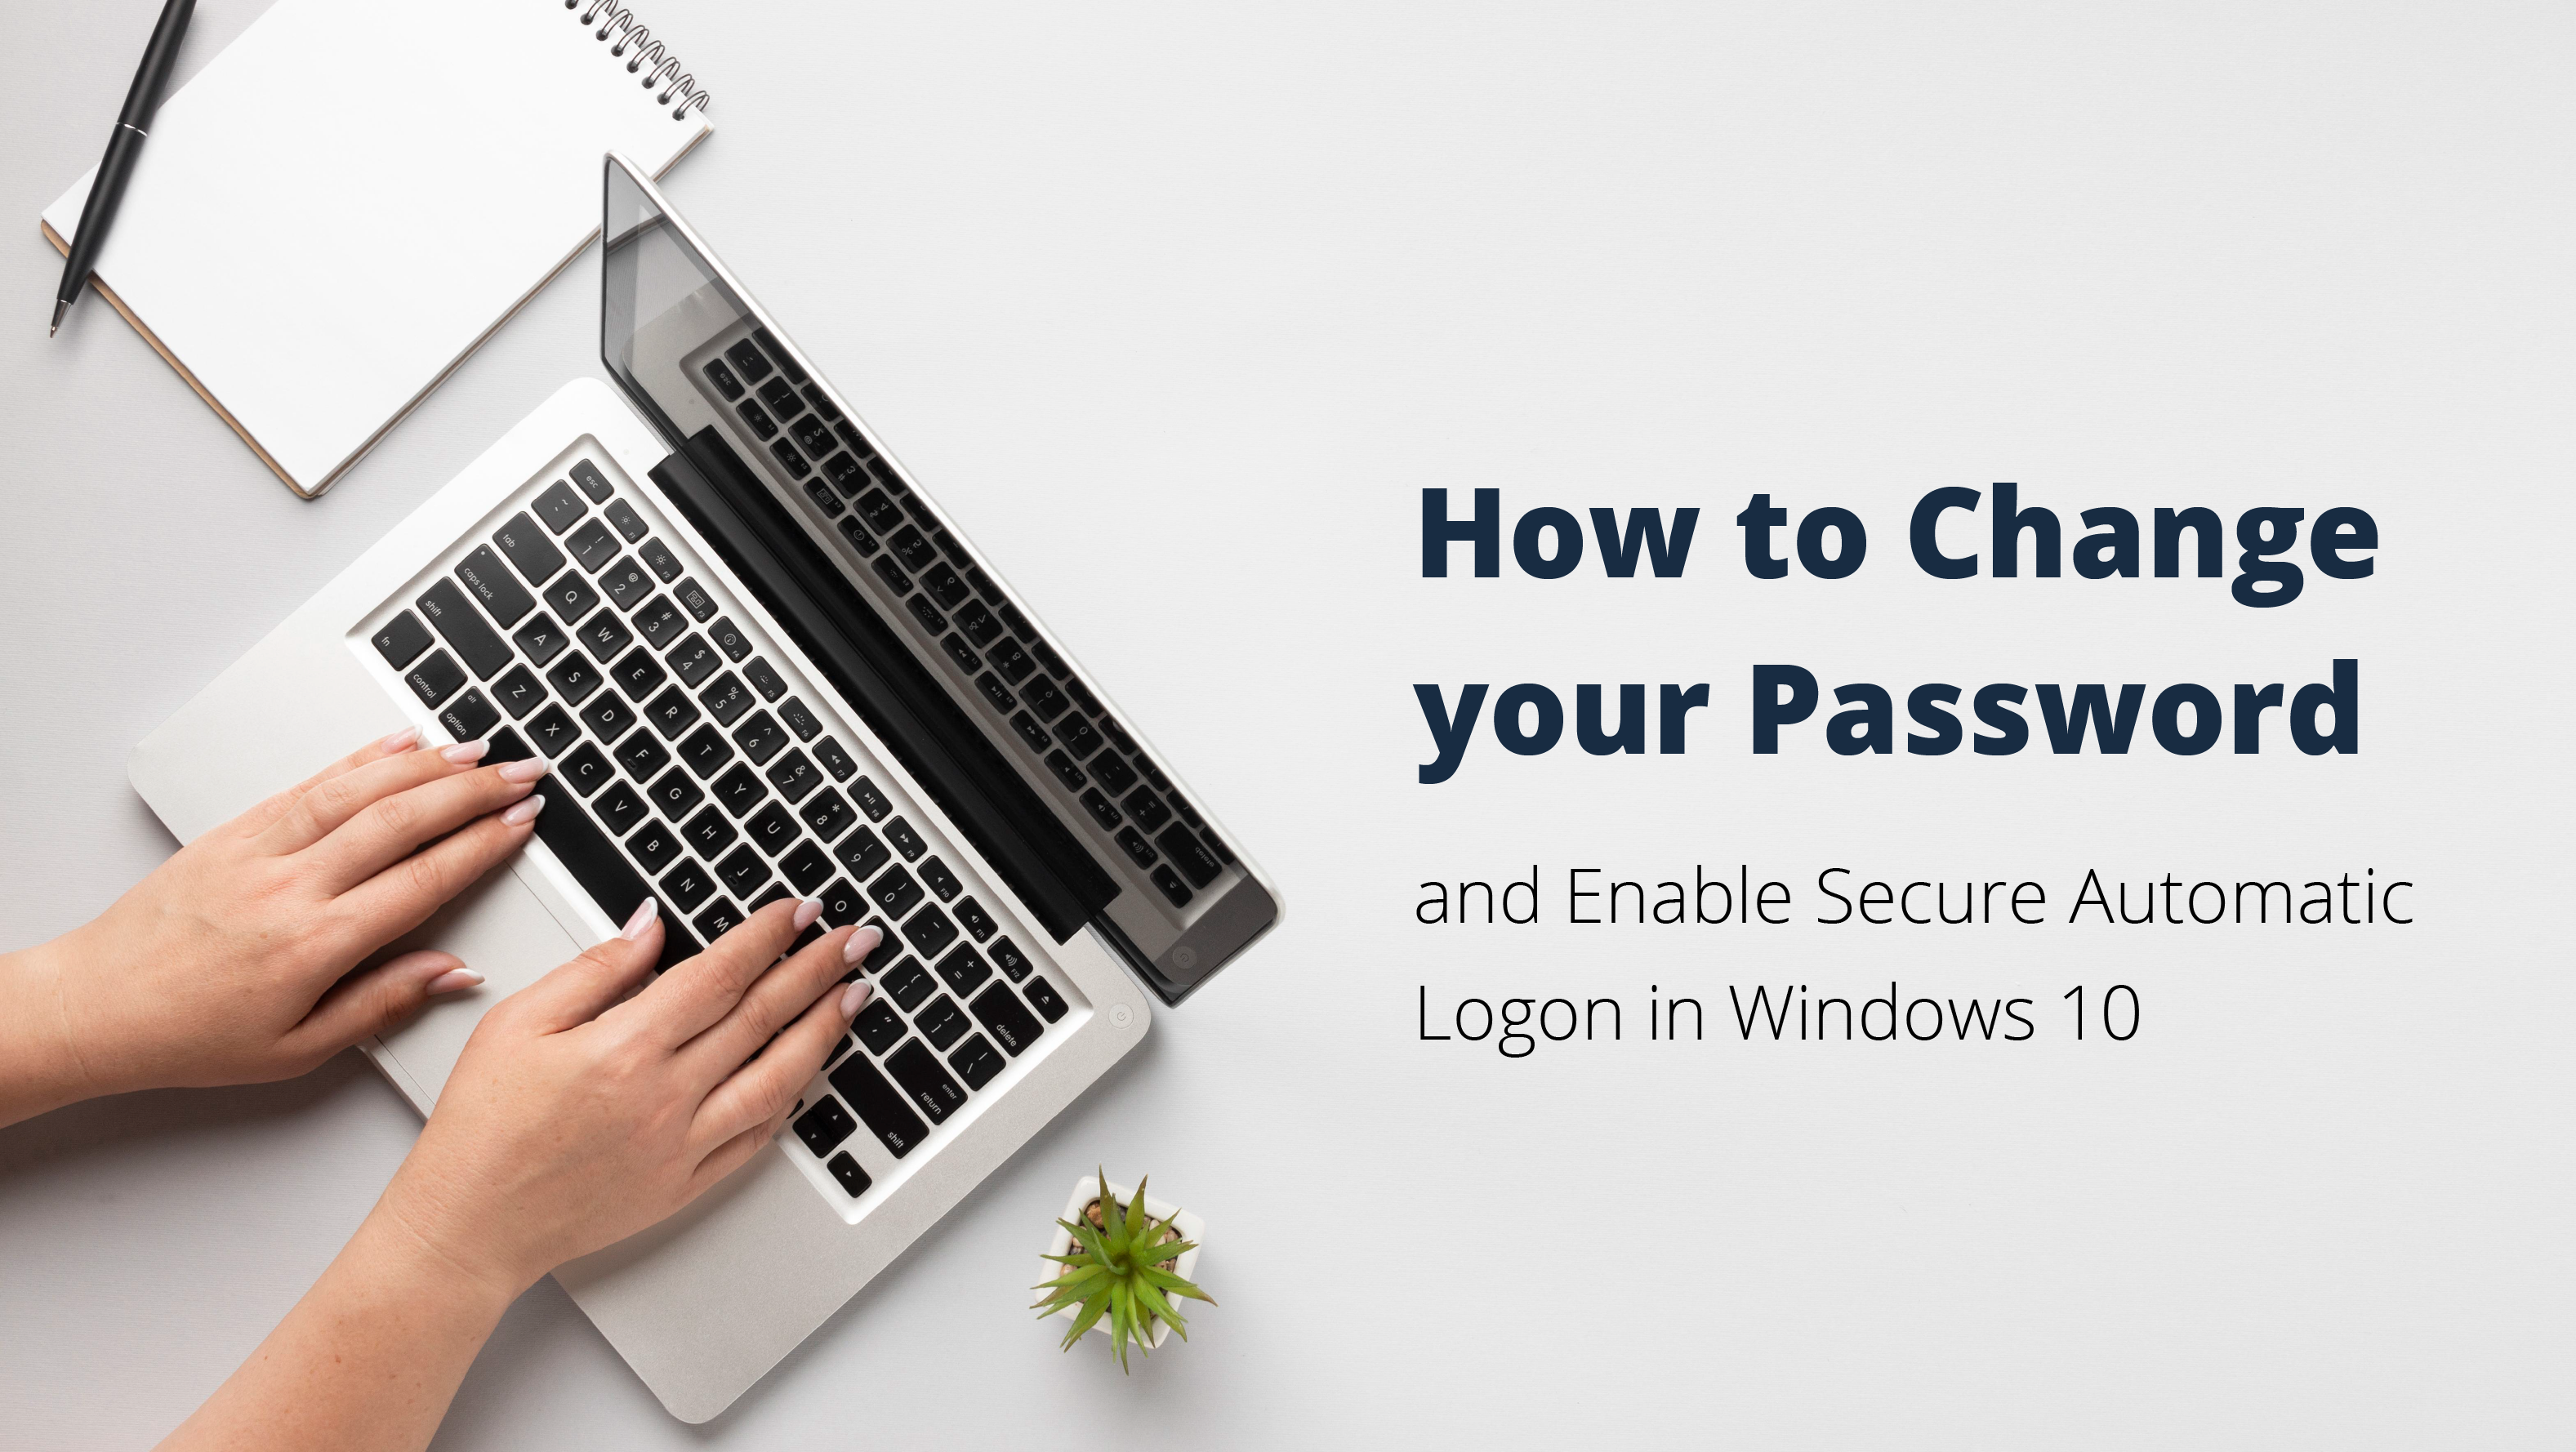 How to Change the Password on Windows 10